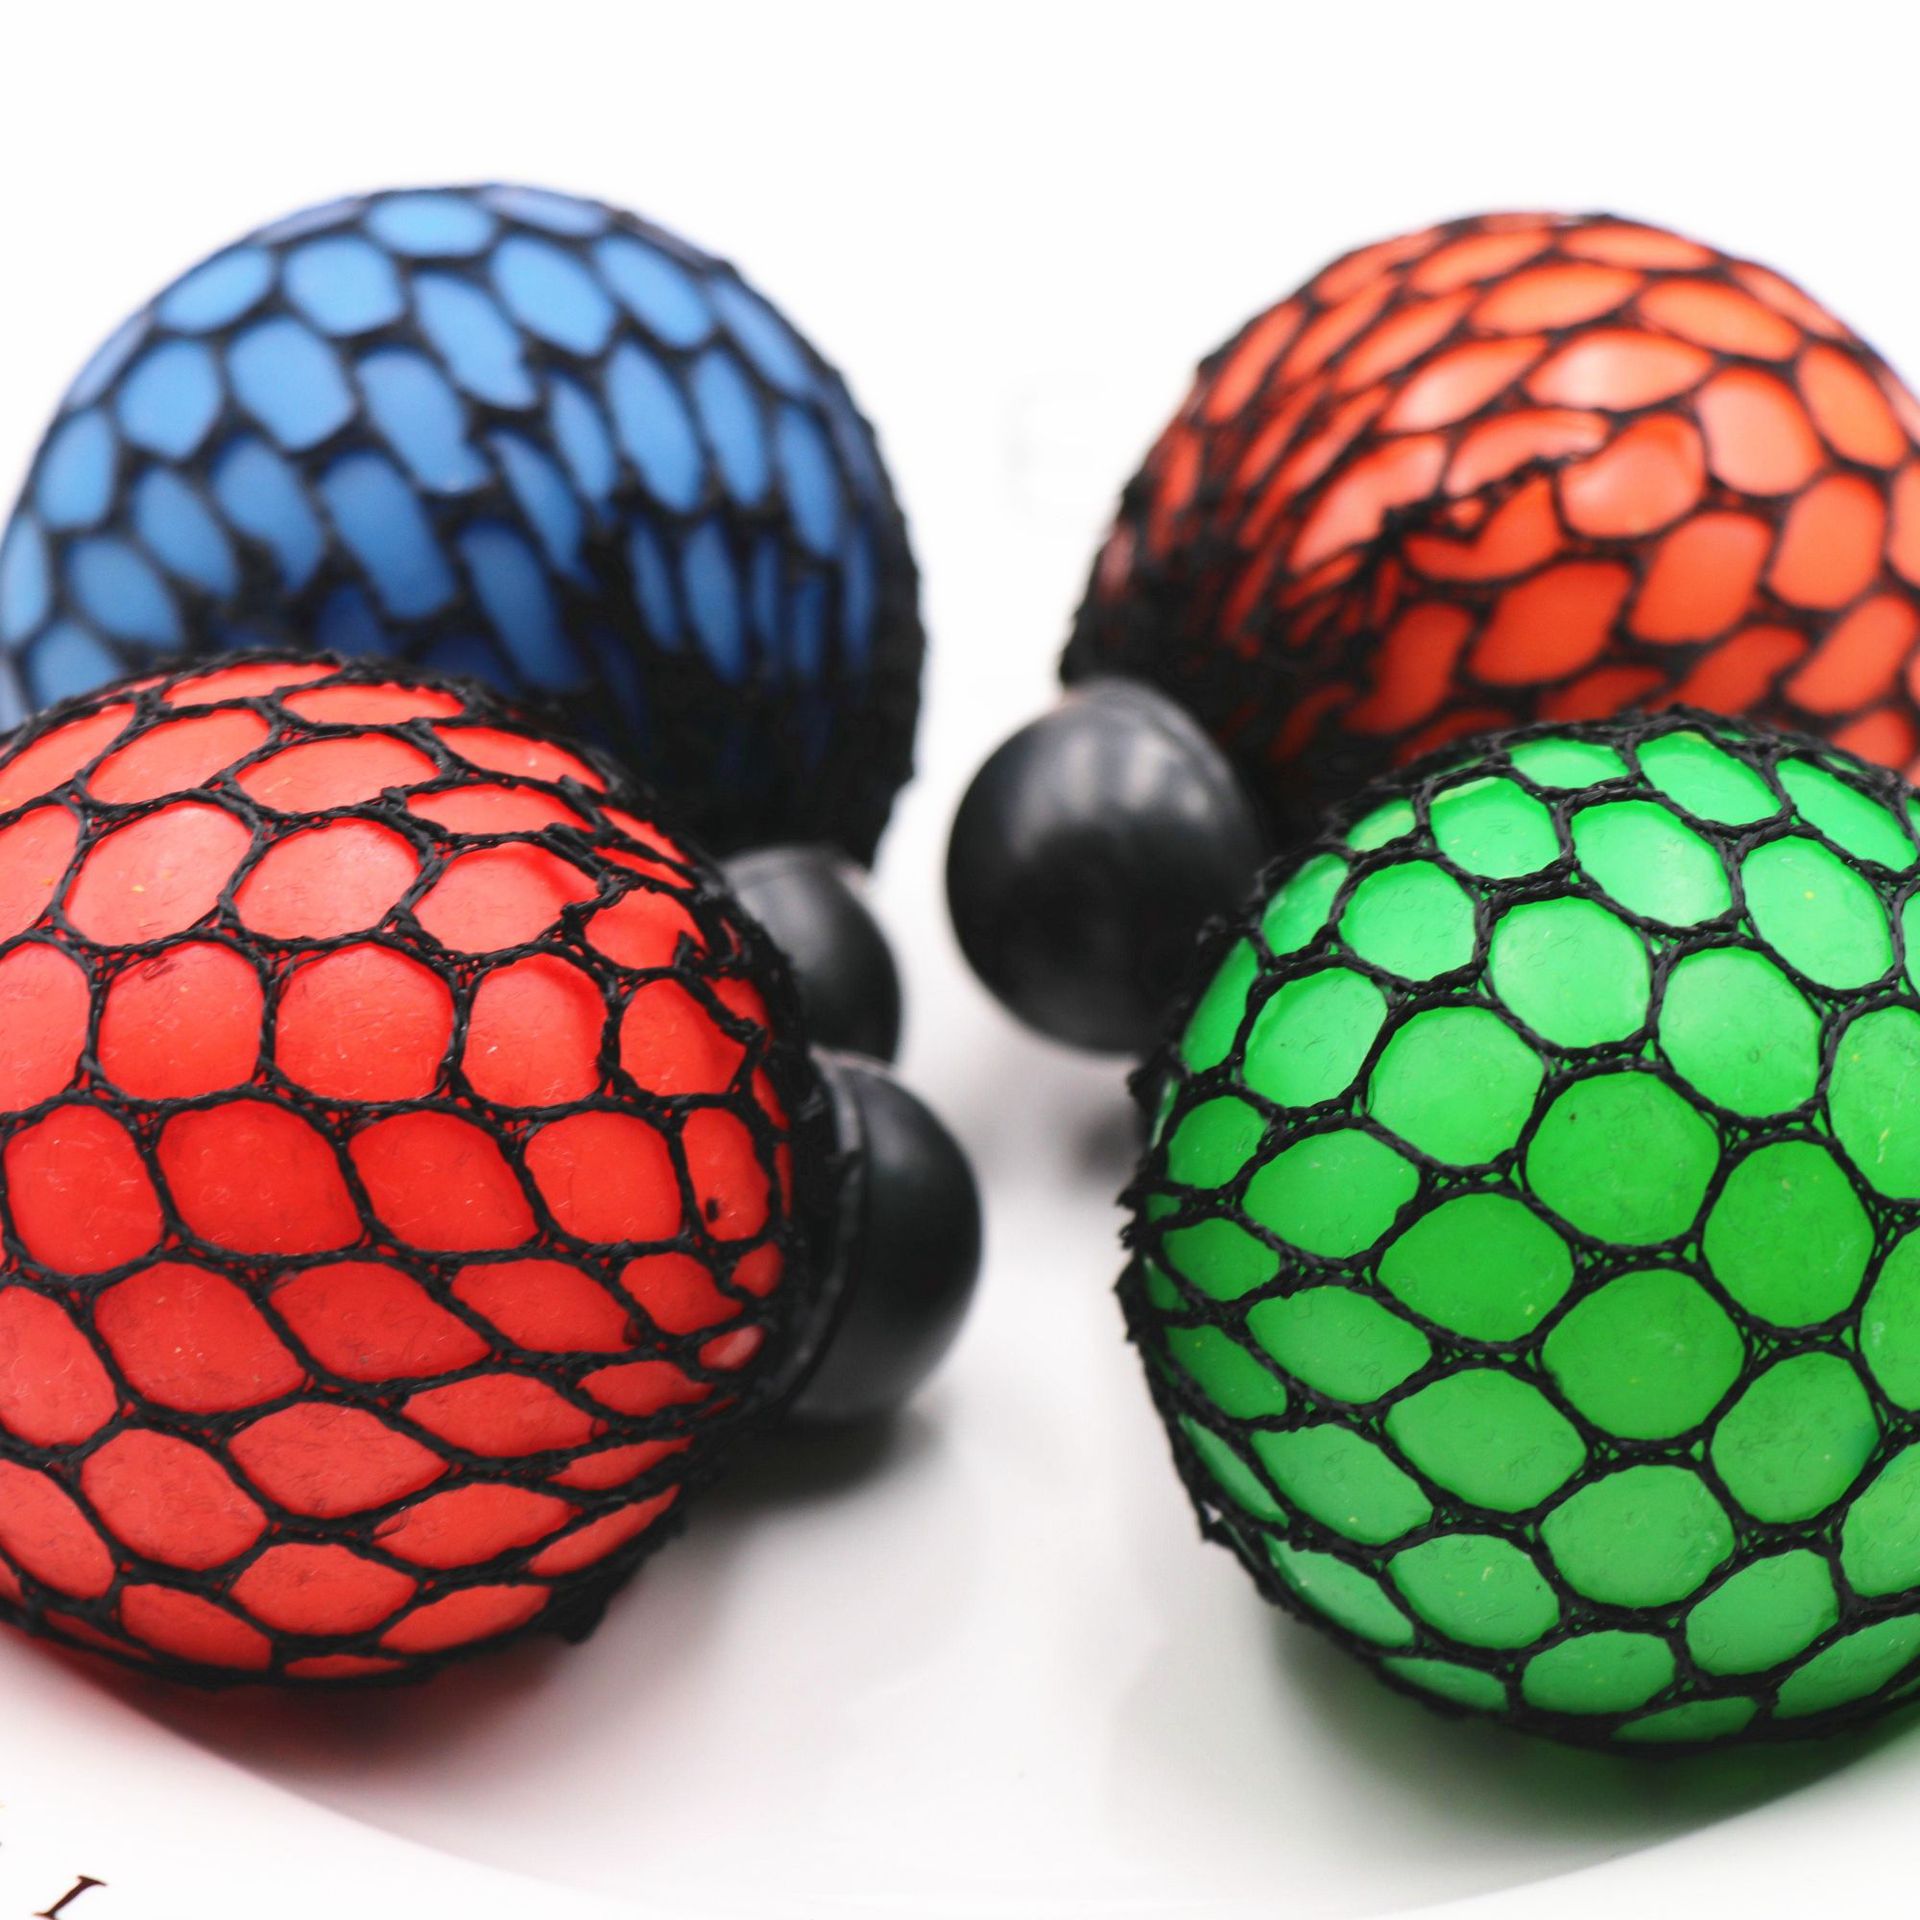 Fidget Toys Stress Relief Sensory Toy Mesh Squishy Balls for Autism Anxiety ADHD Kids Adults School 2 - Simple Dimple Fidget